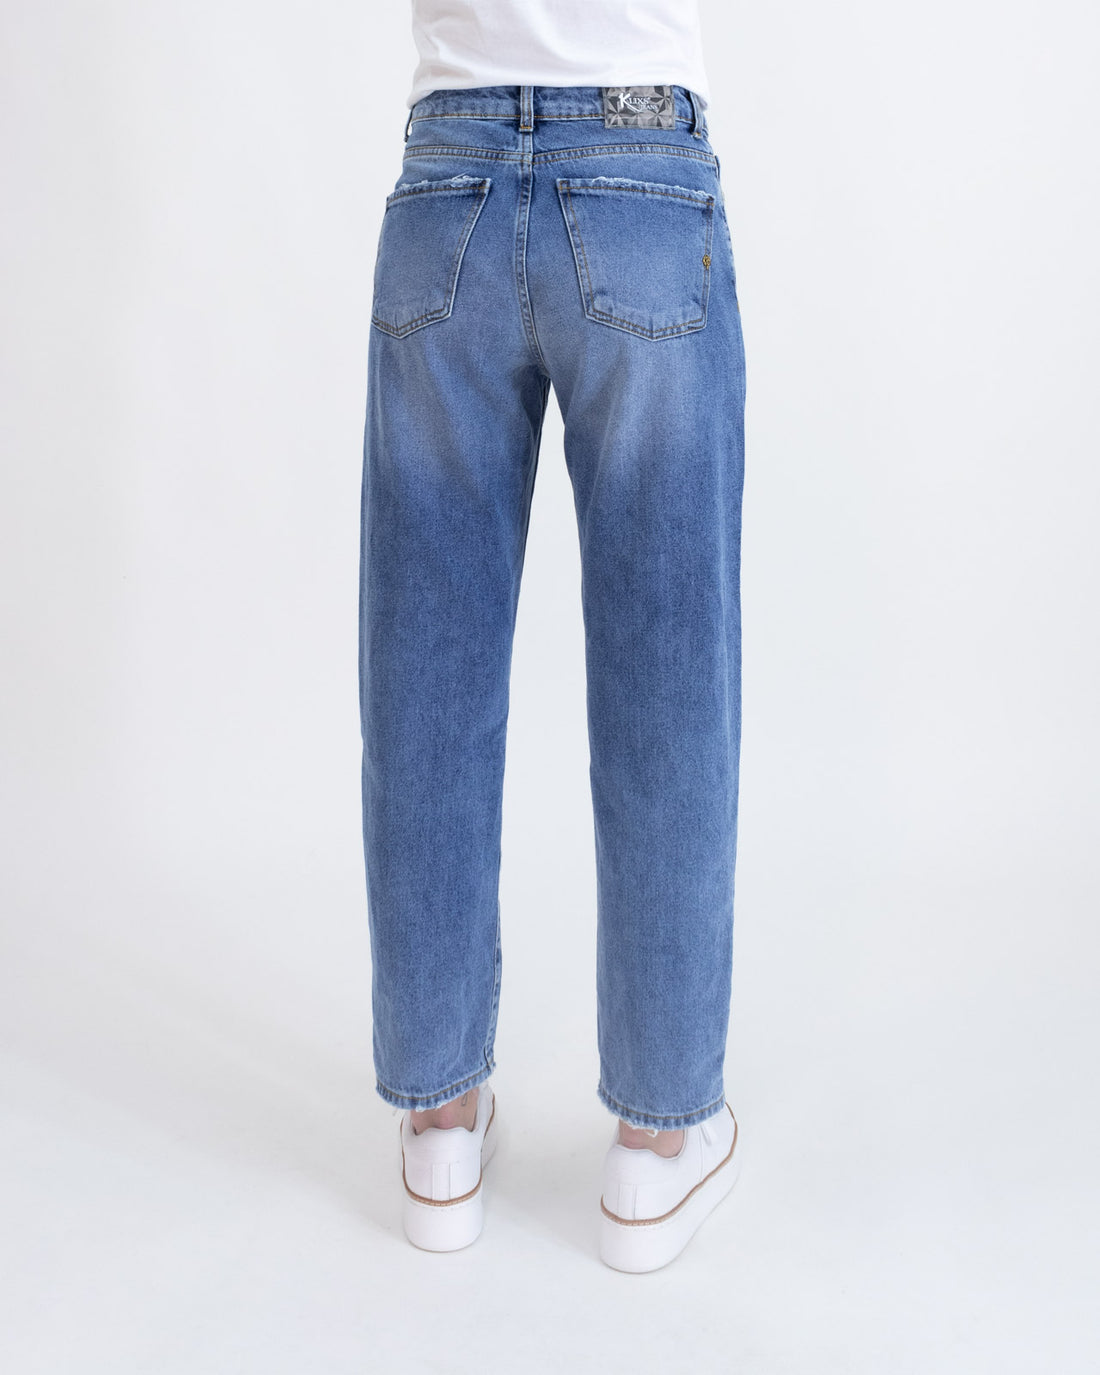 Straight high waisted jeans